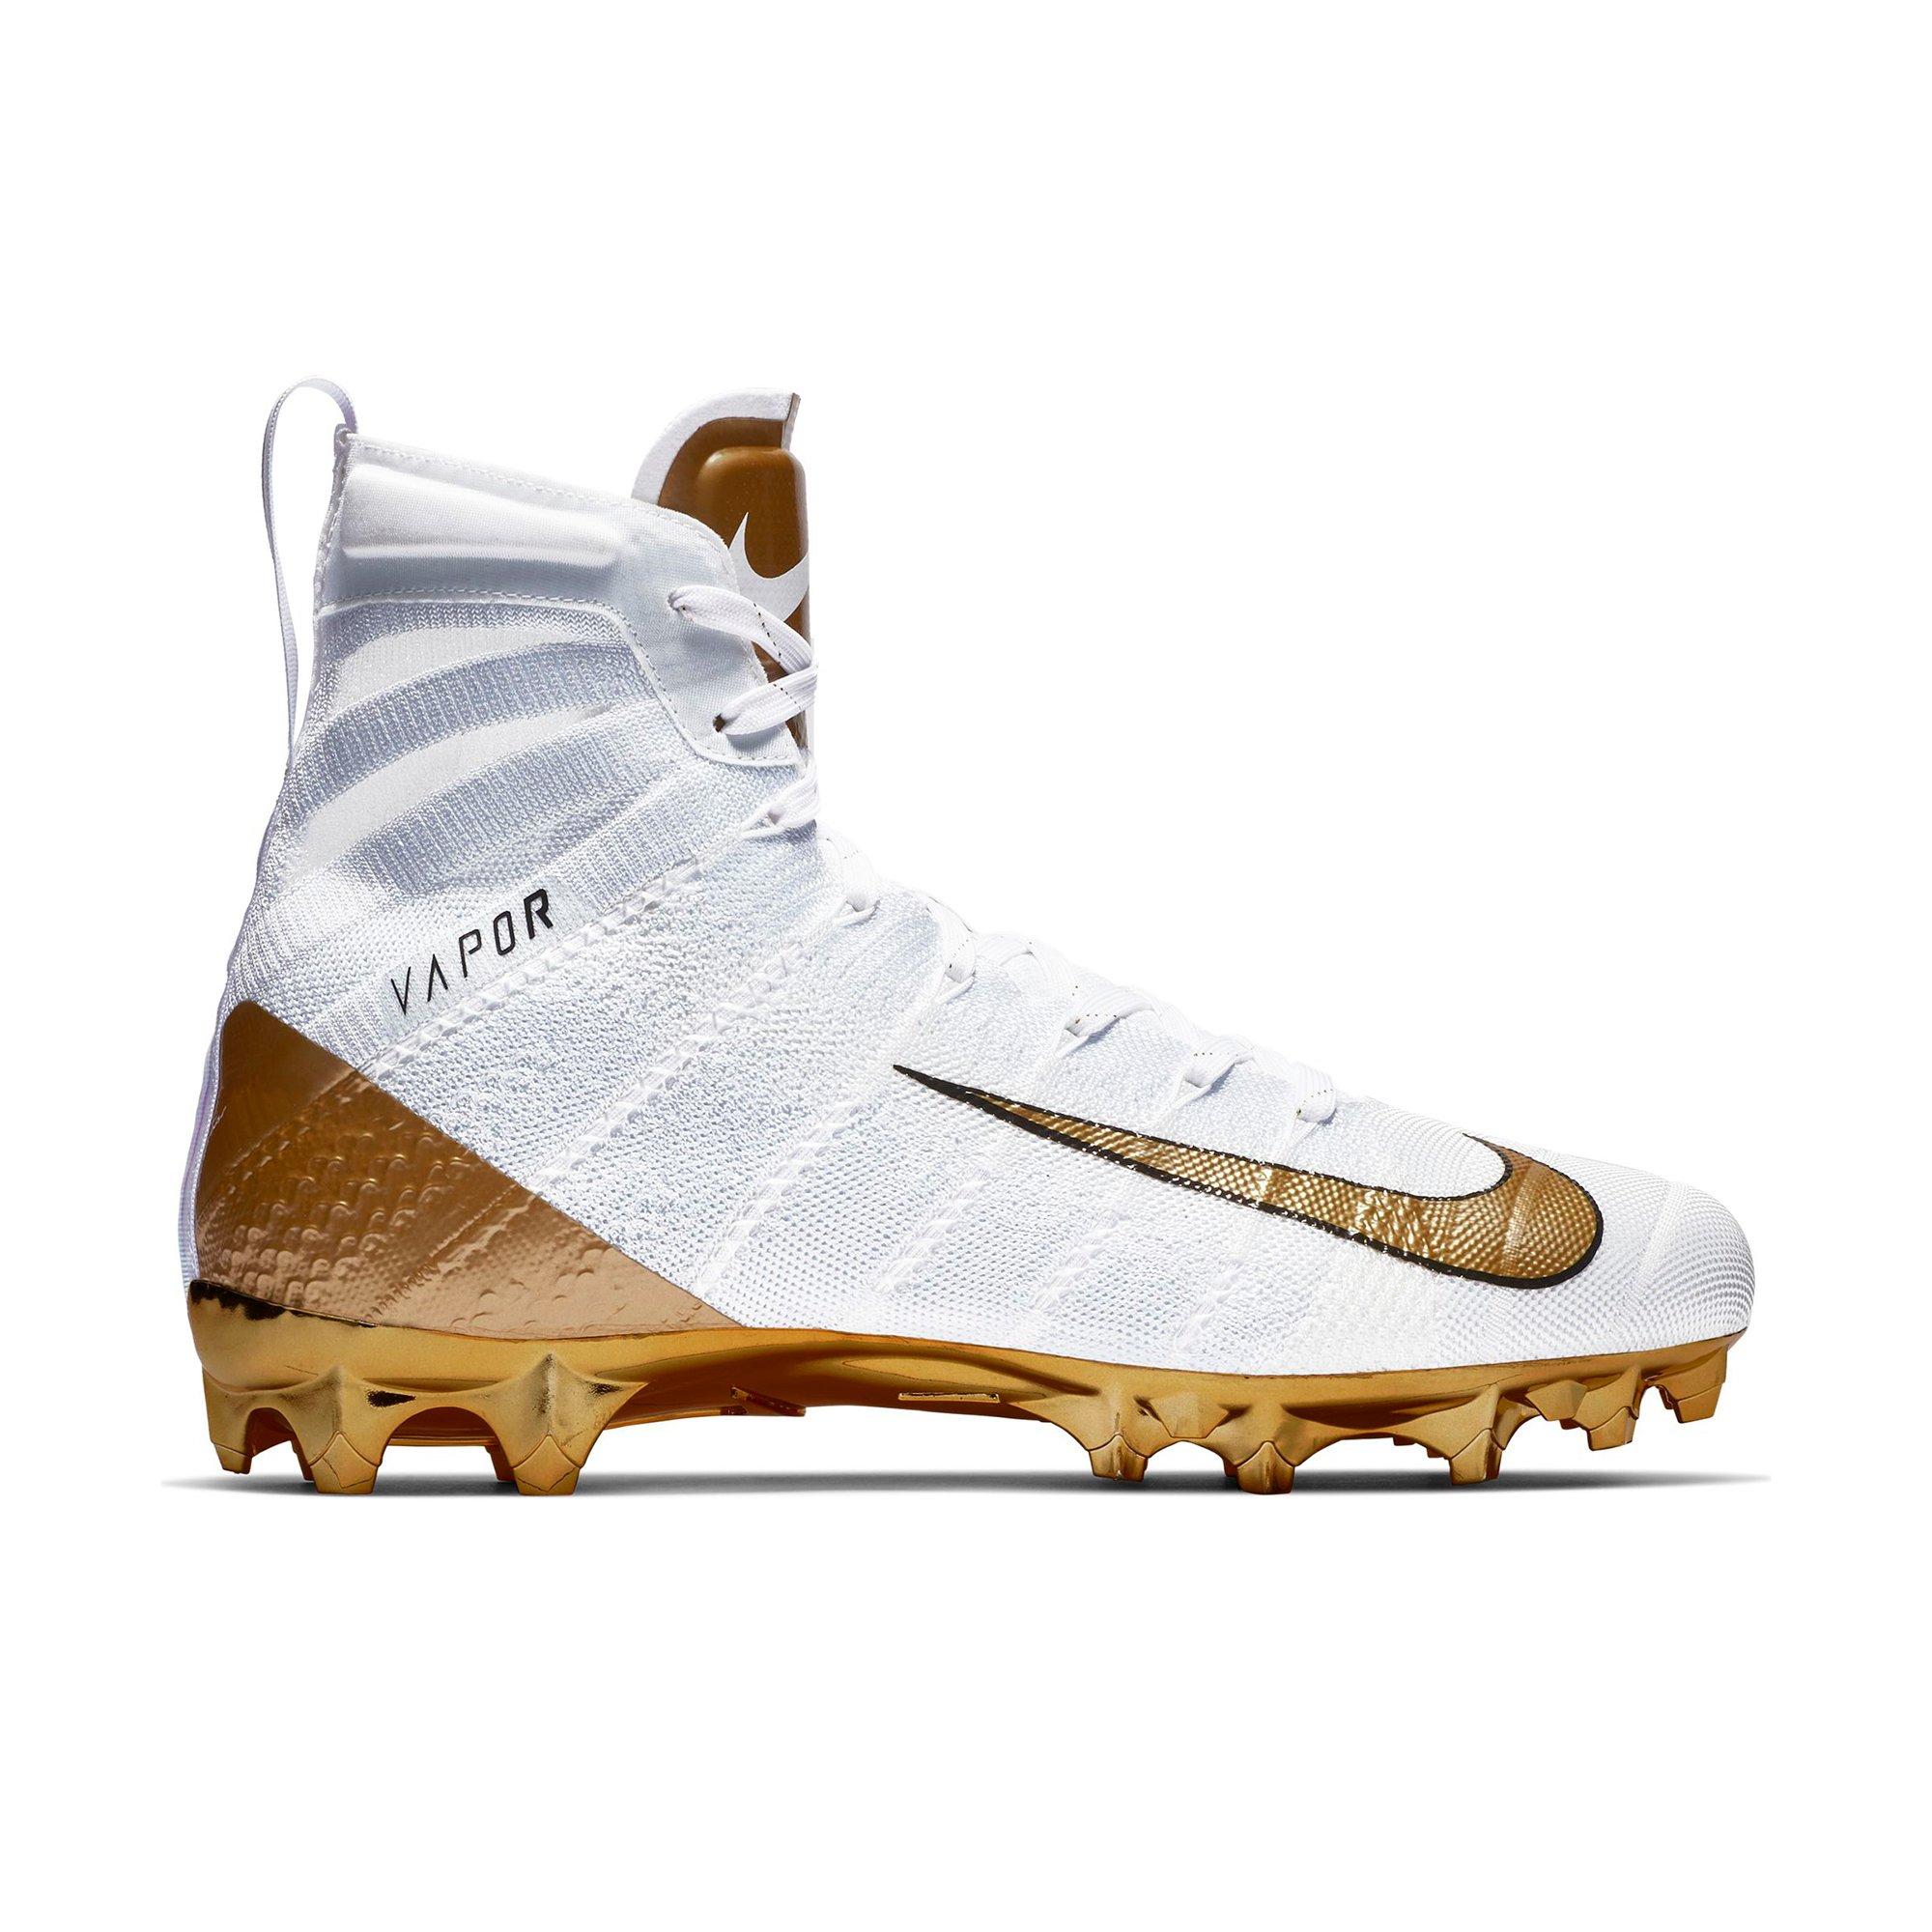 nike cleats football gold